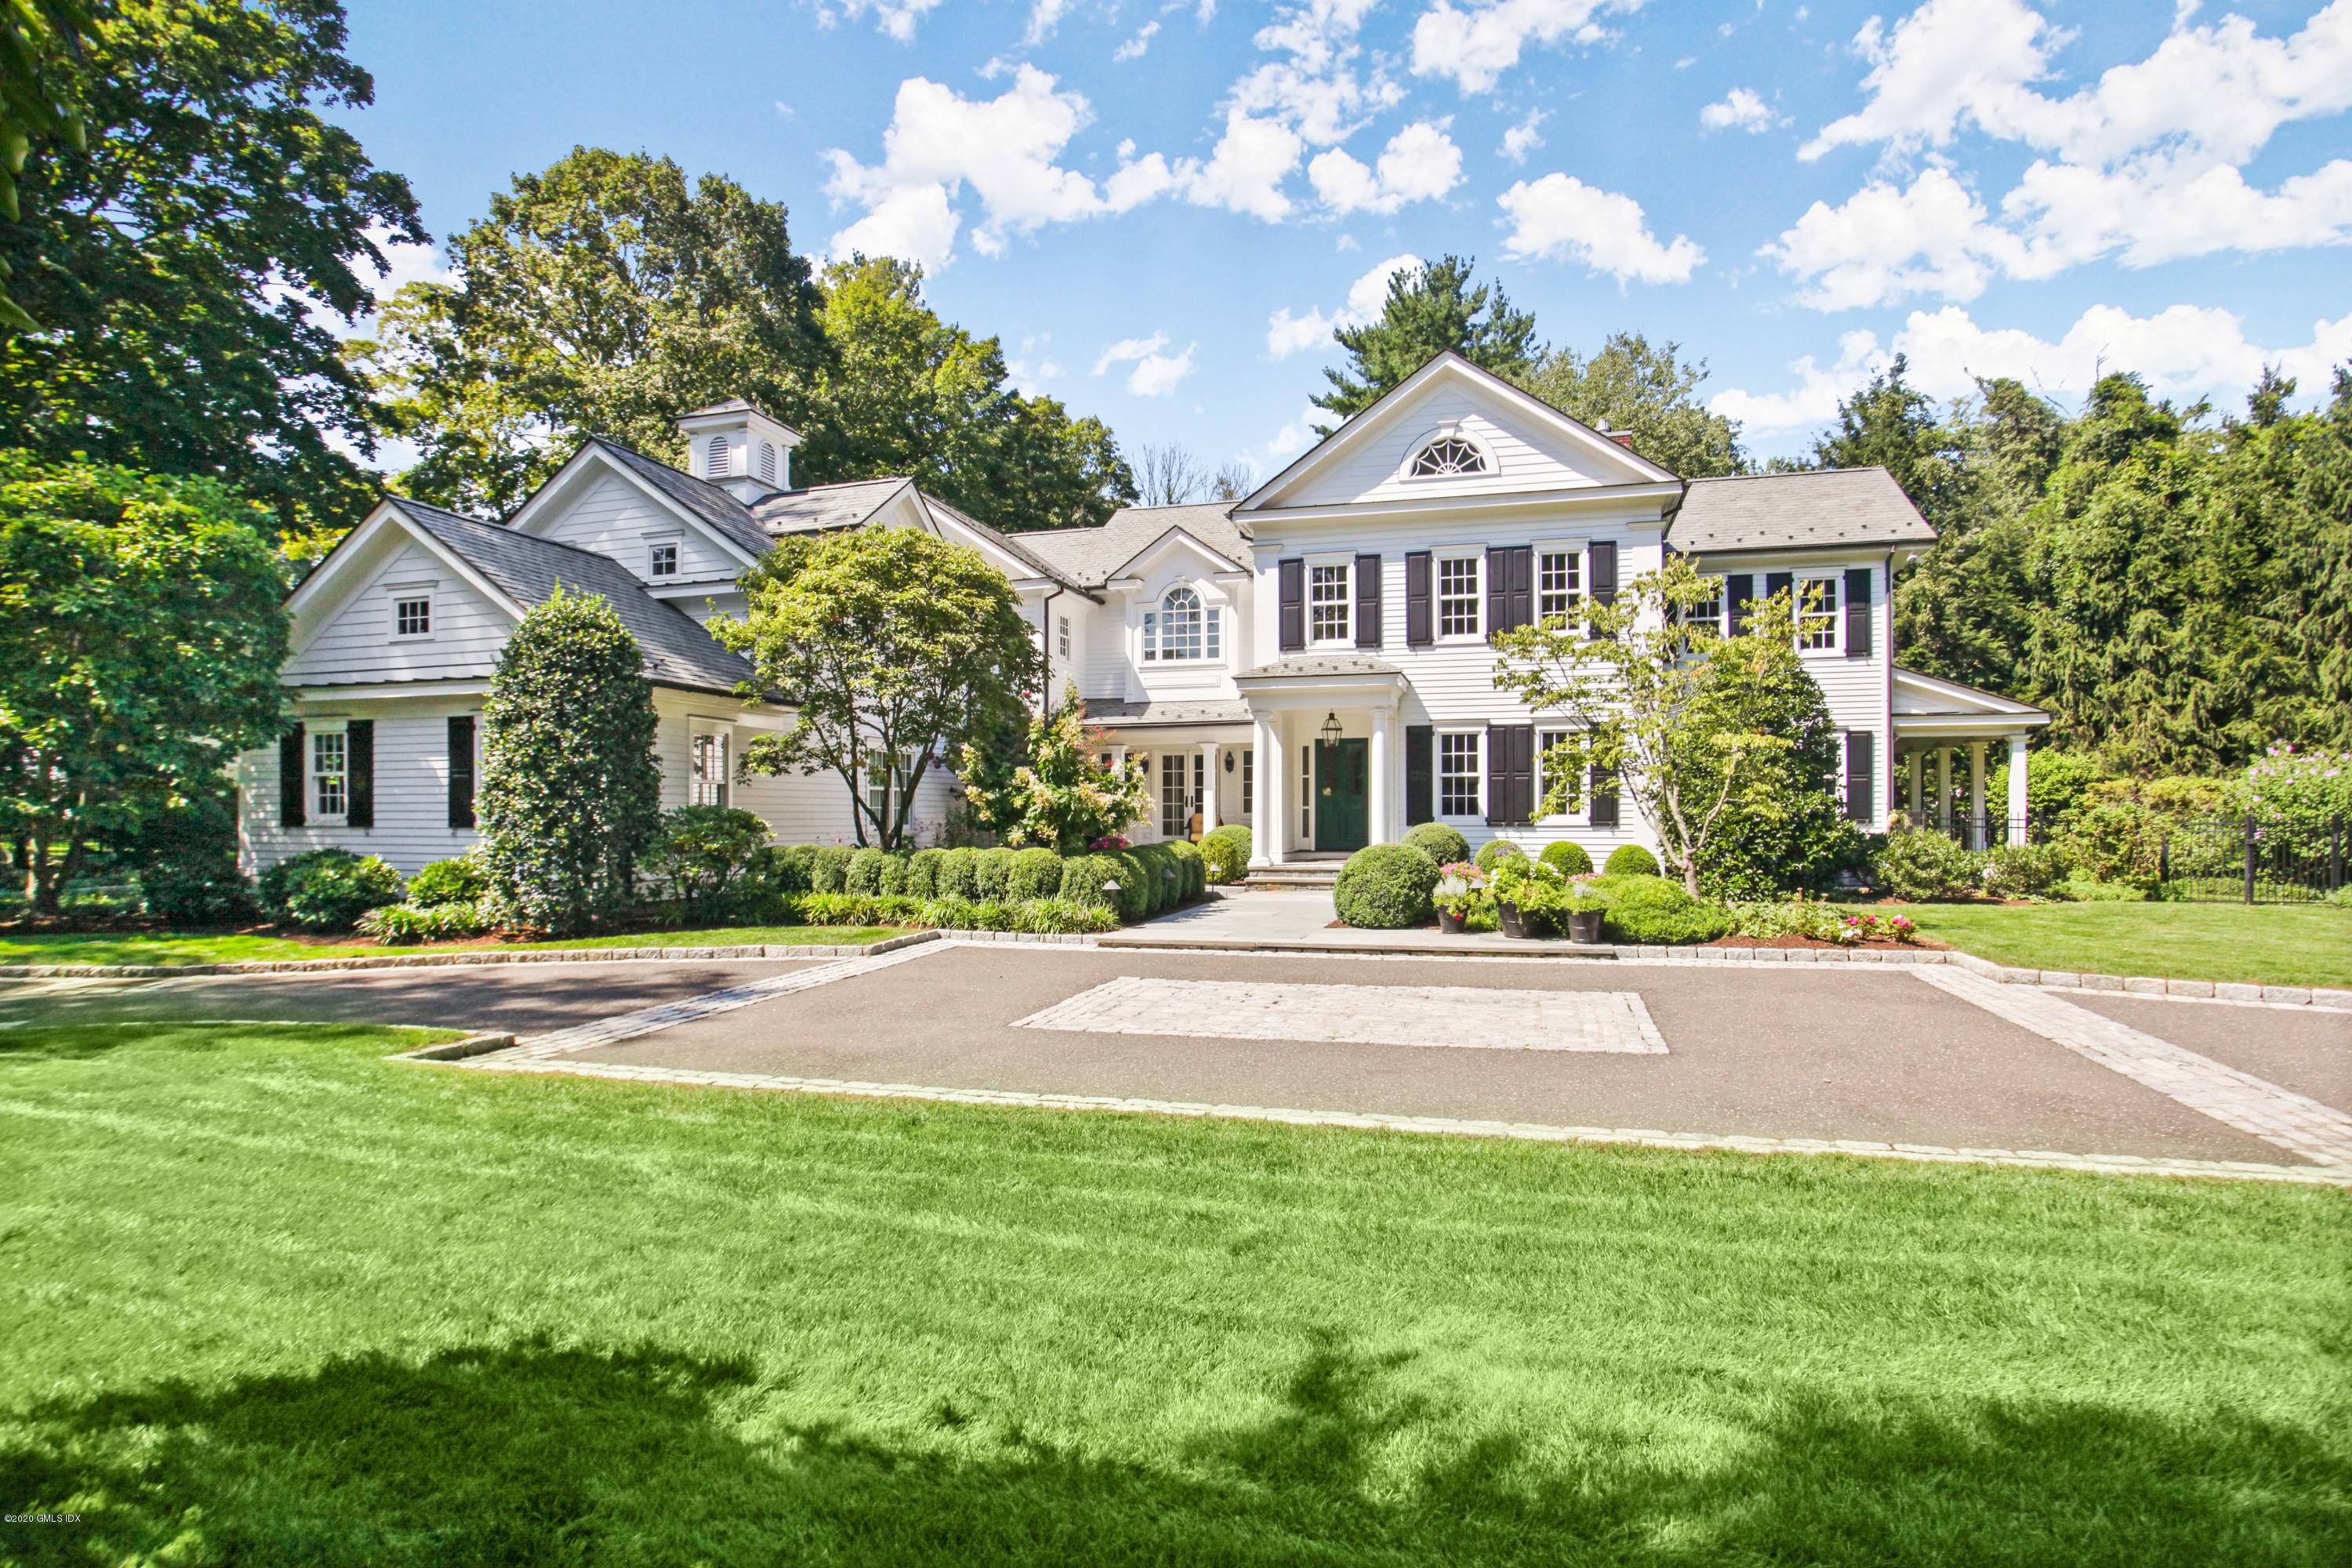 Quintessential New England Colonial on a beautiful one acre with a pool and spa.